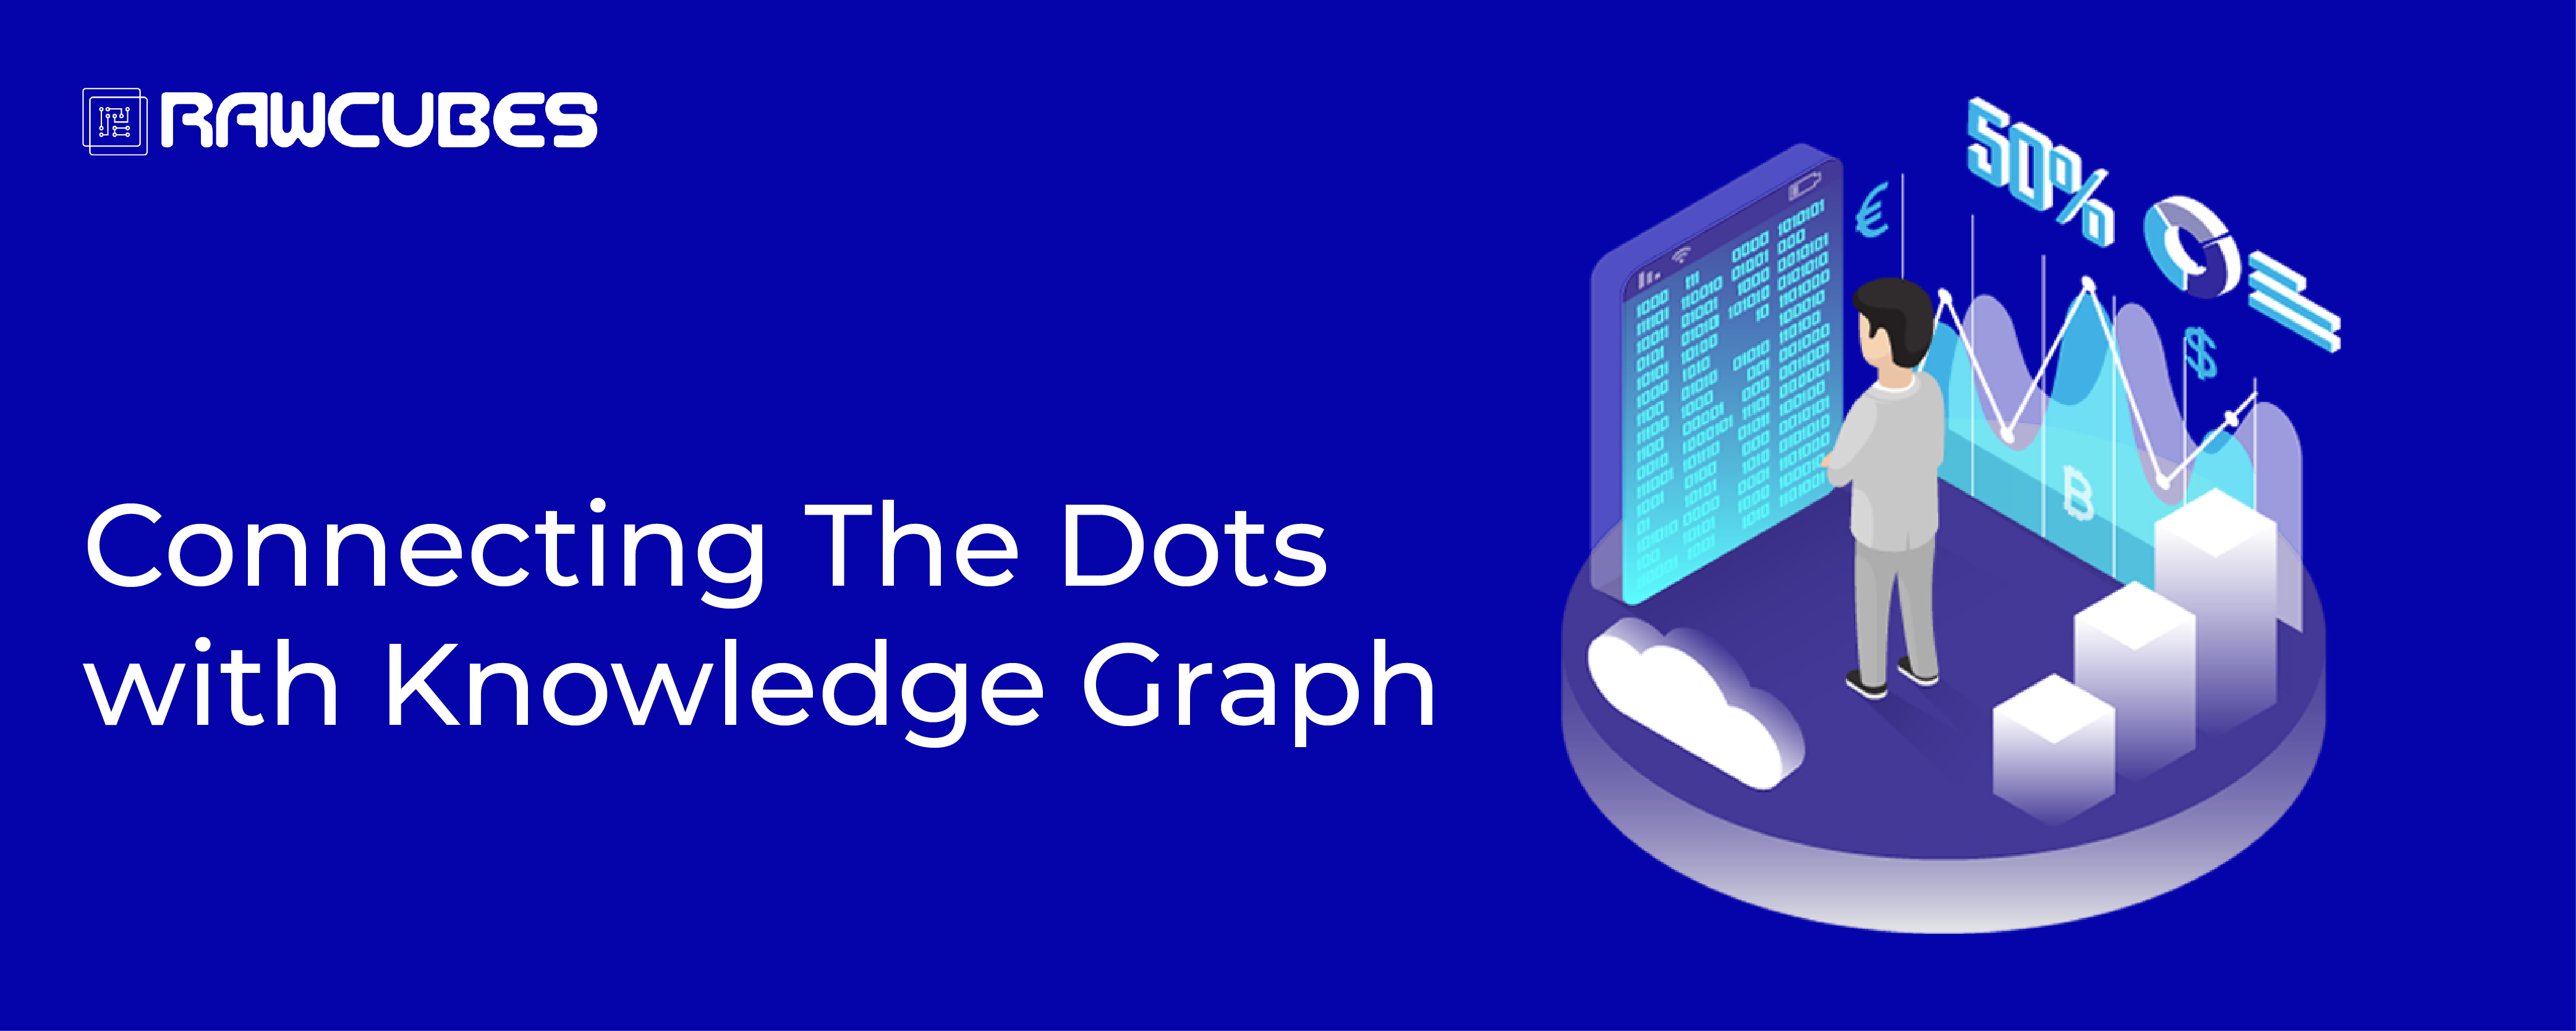 linking the right dots with knowledge graph